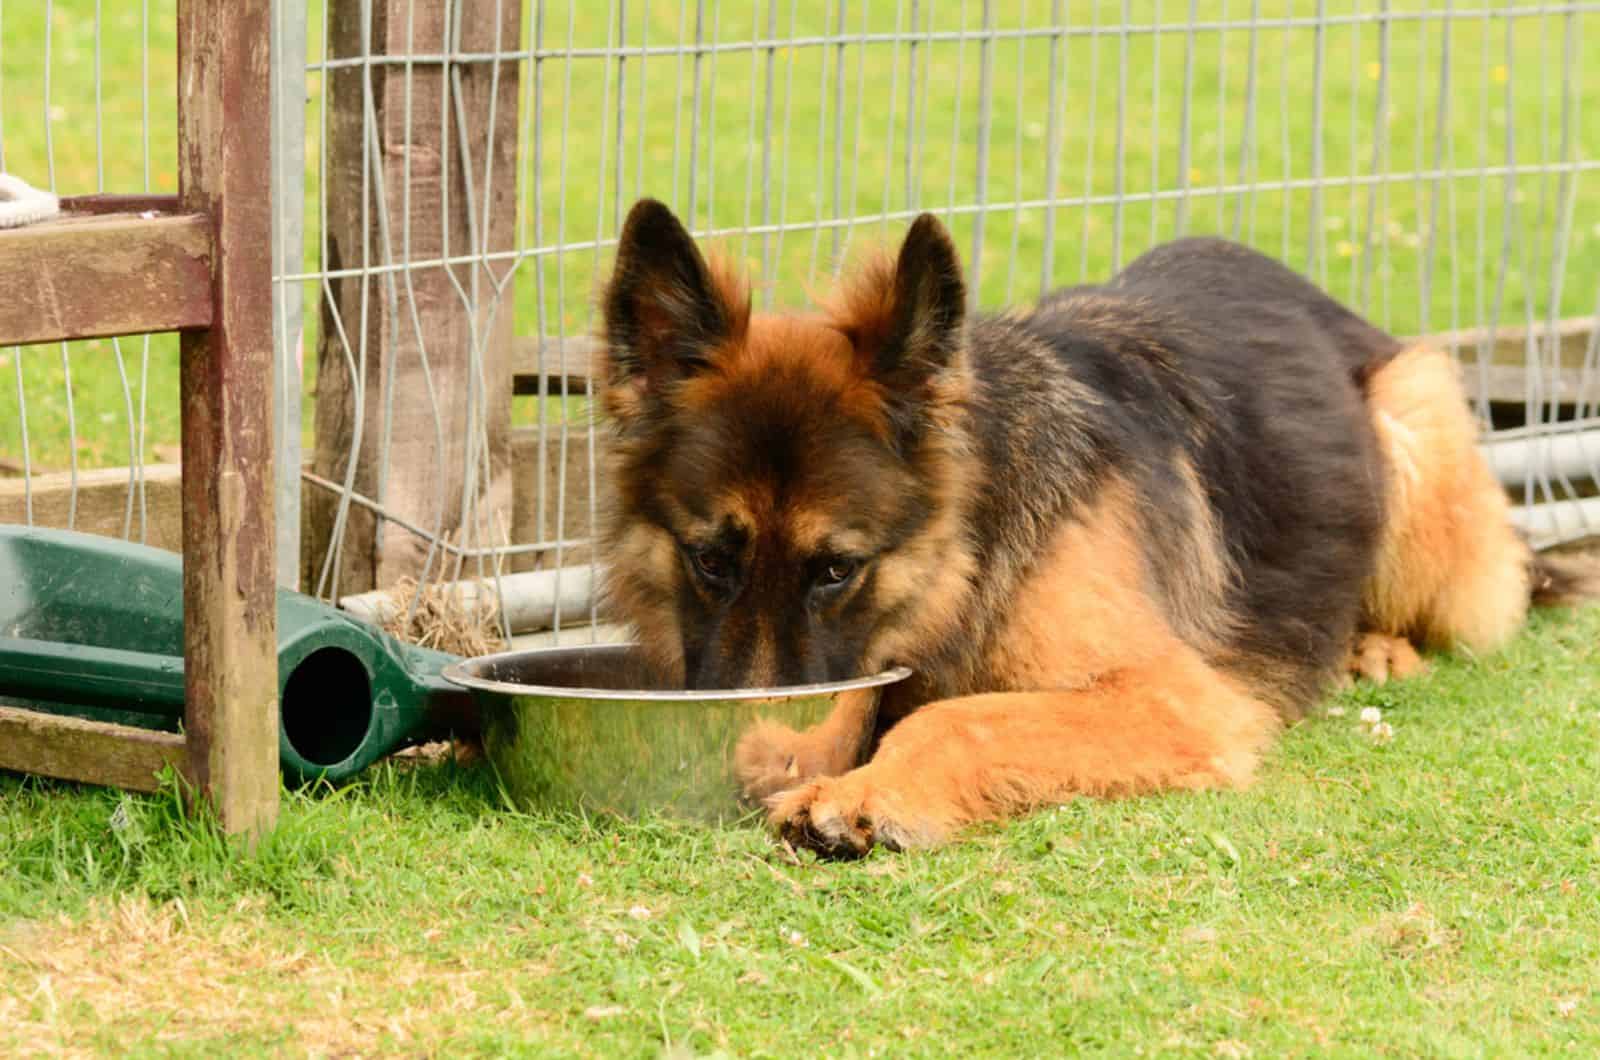 german shepherd drinking water from the bowl in the yard